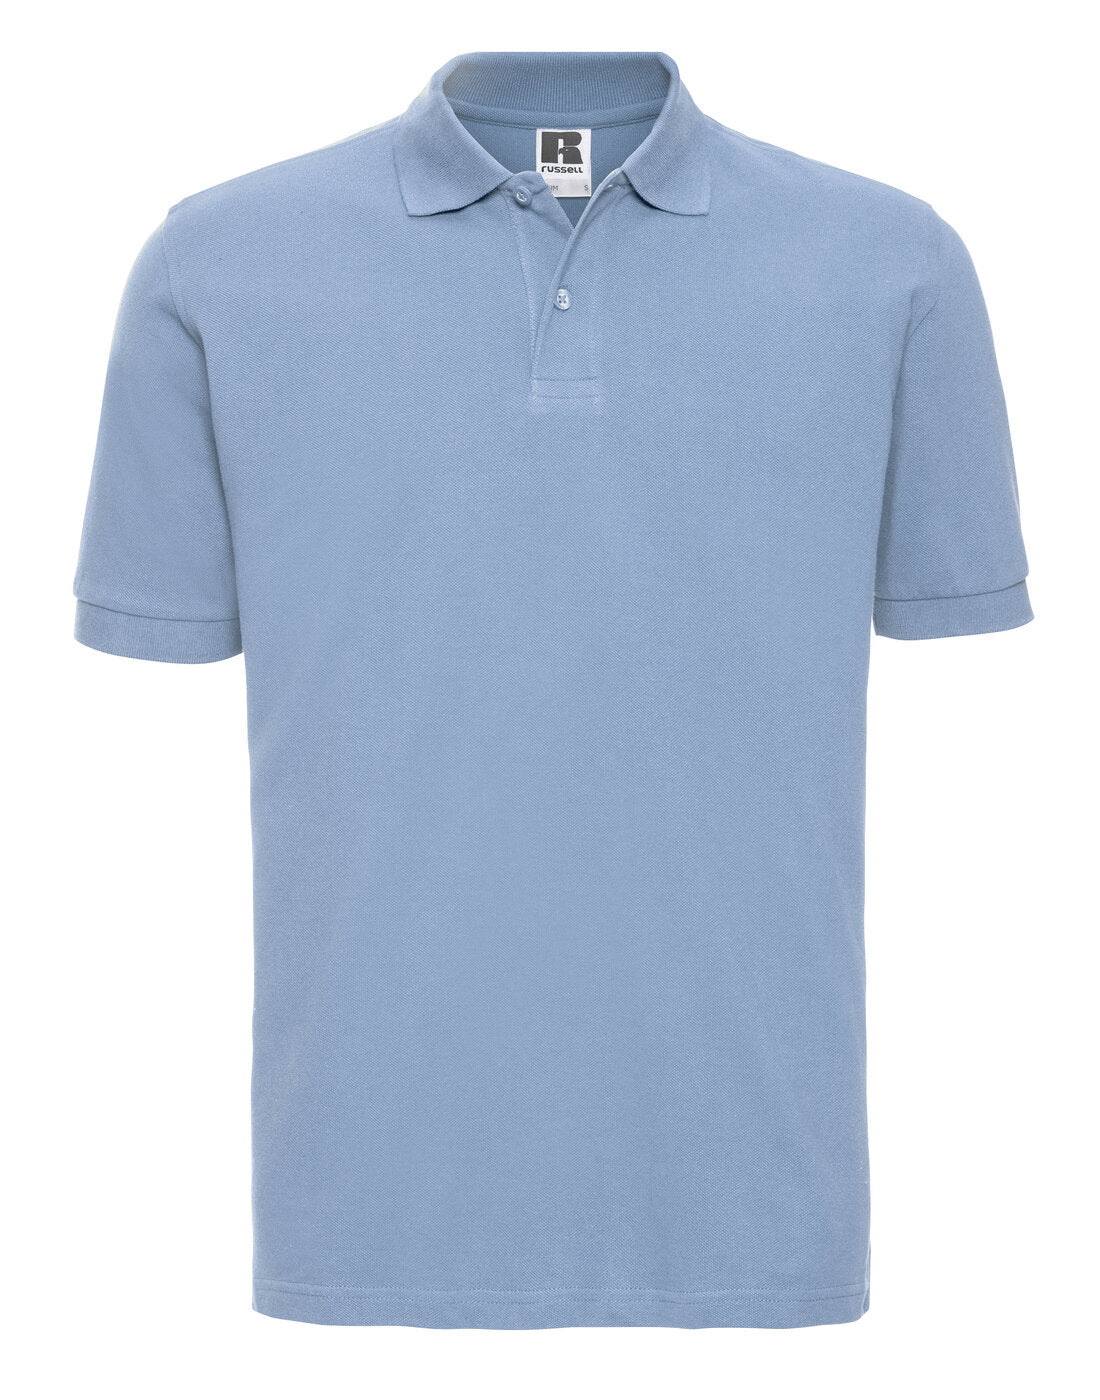 Russell Classic Cotton Polo - 569M Sky